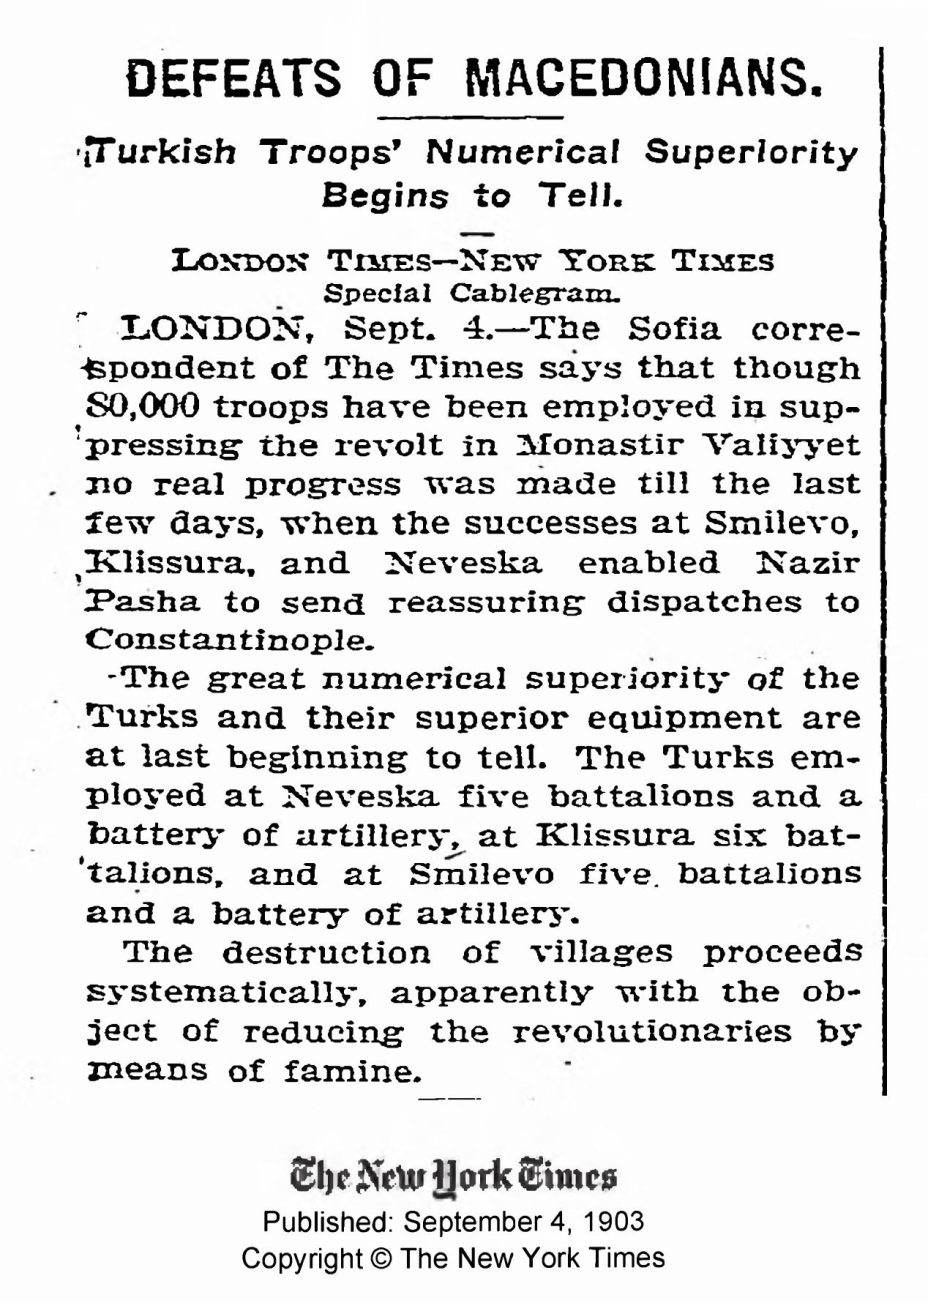 1903.09.04_The New York Times - Defeat of Macedonians